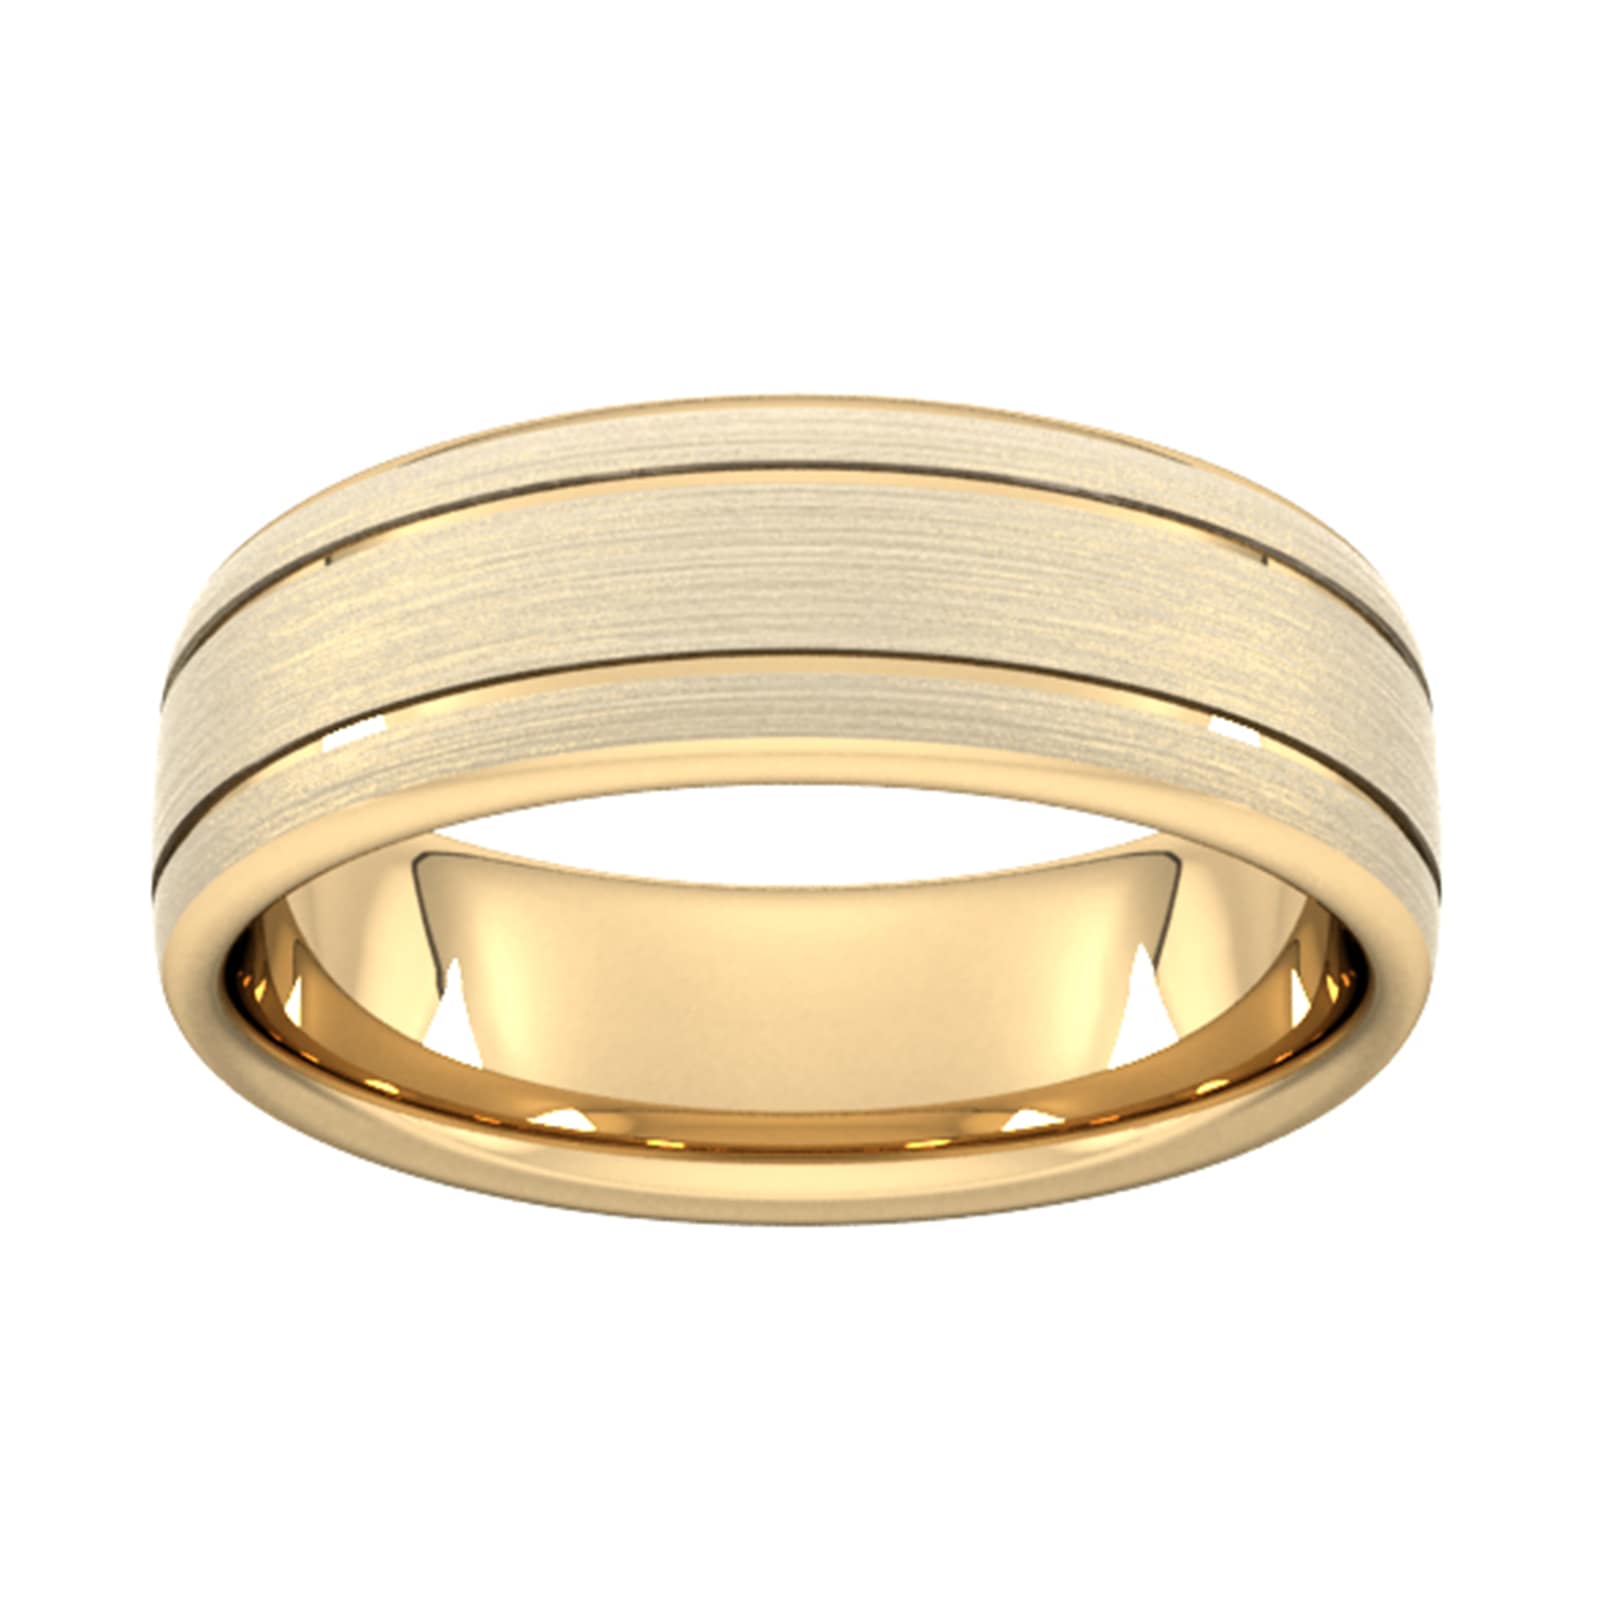 7mm Slight Court Standard Matt Finish With Double Grooves Wedding Ring In 9 Carat Yellow Gold - Ring Size I